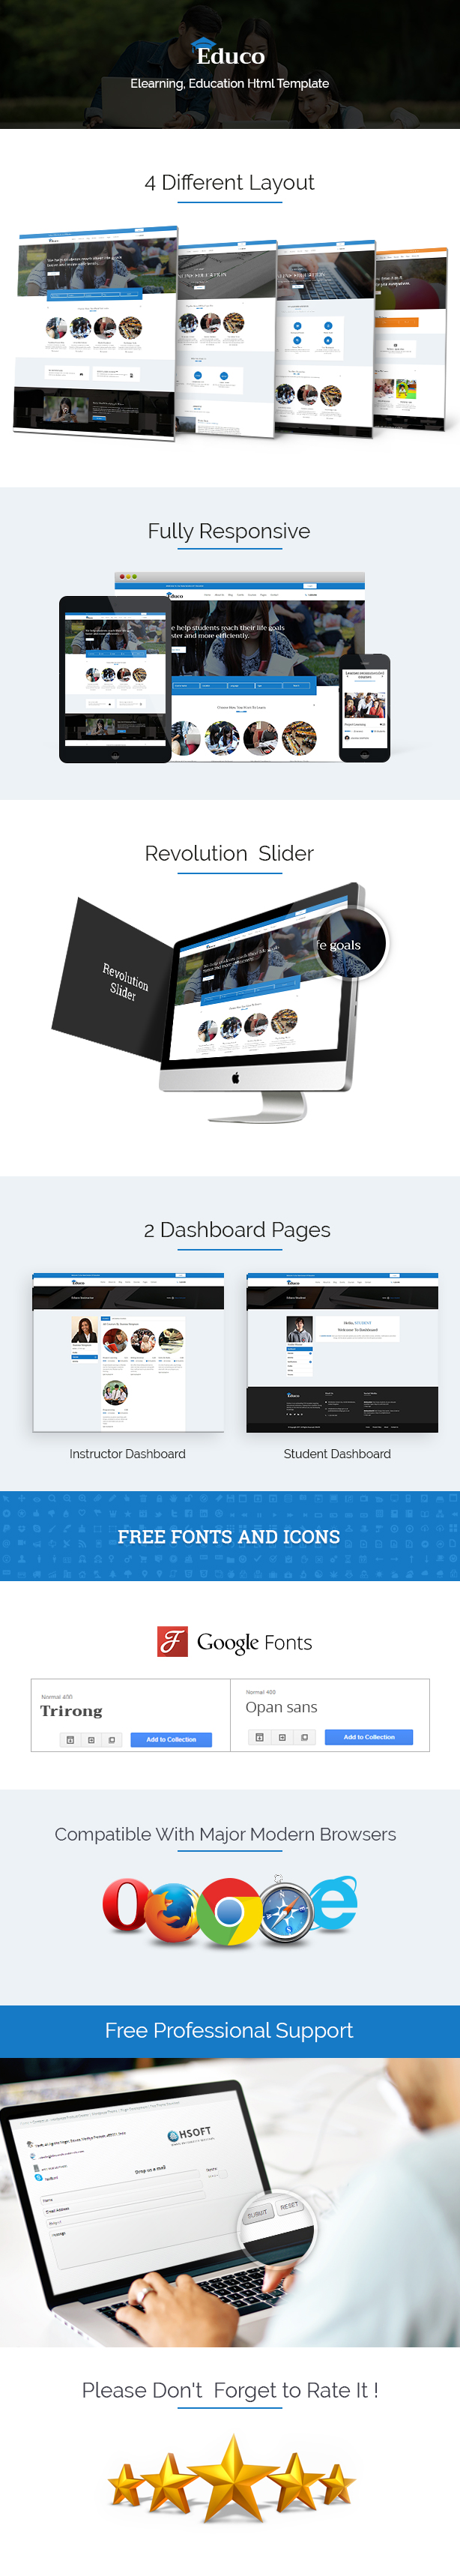 Educo - Elearning, Education Bootstrap Html Template - 7